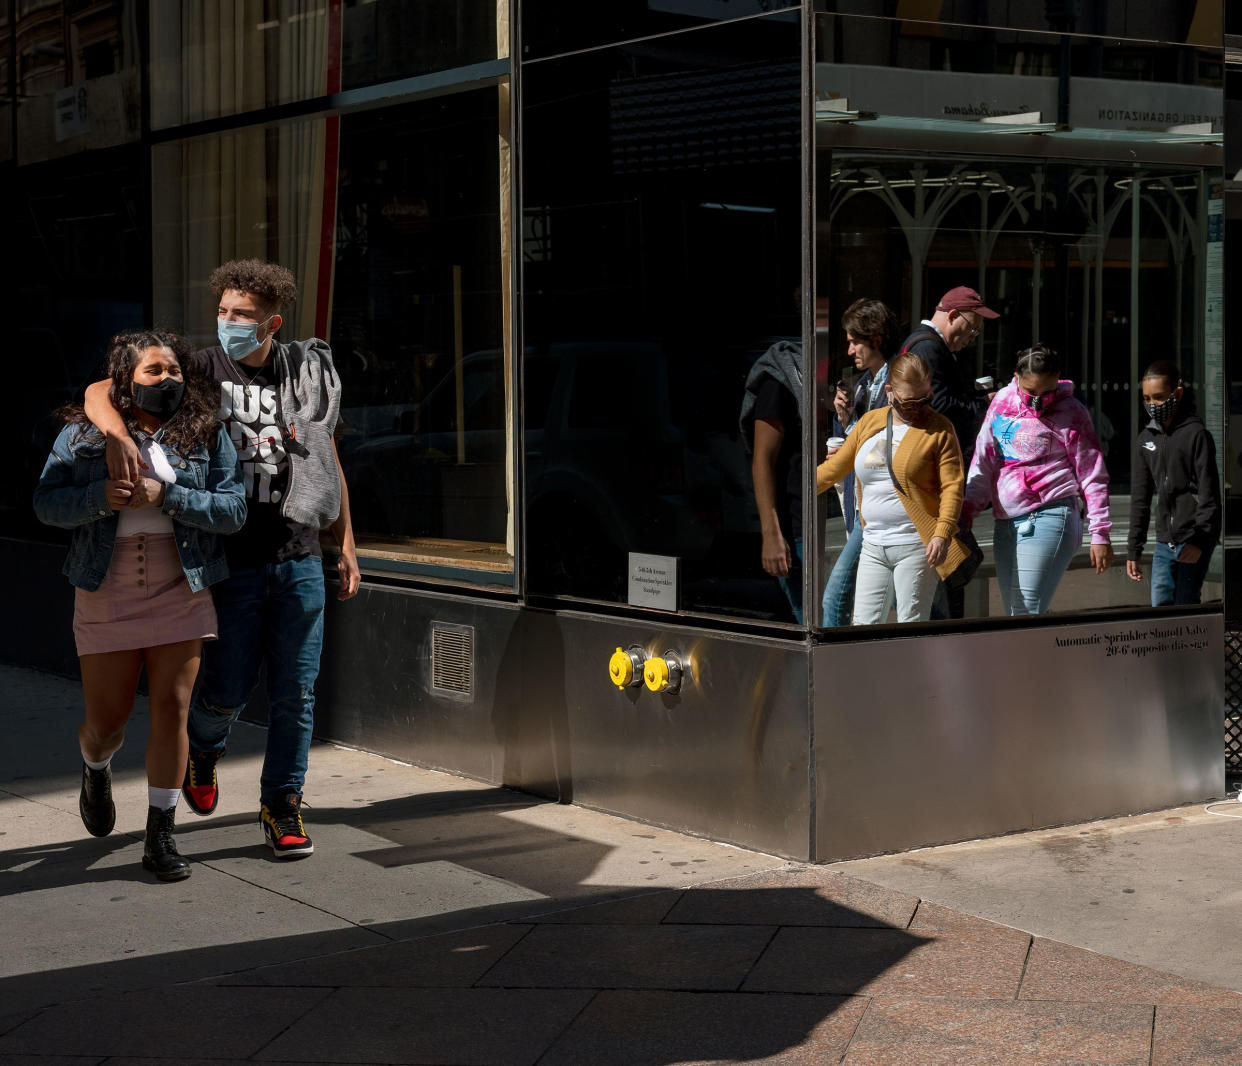 People wearing masks walk in Midtown Manhattan, at 45th st, and 5th ave on Oct. 3, 2020.